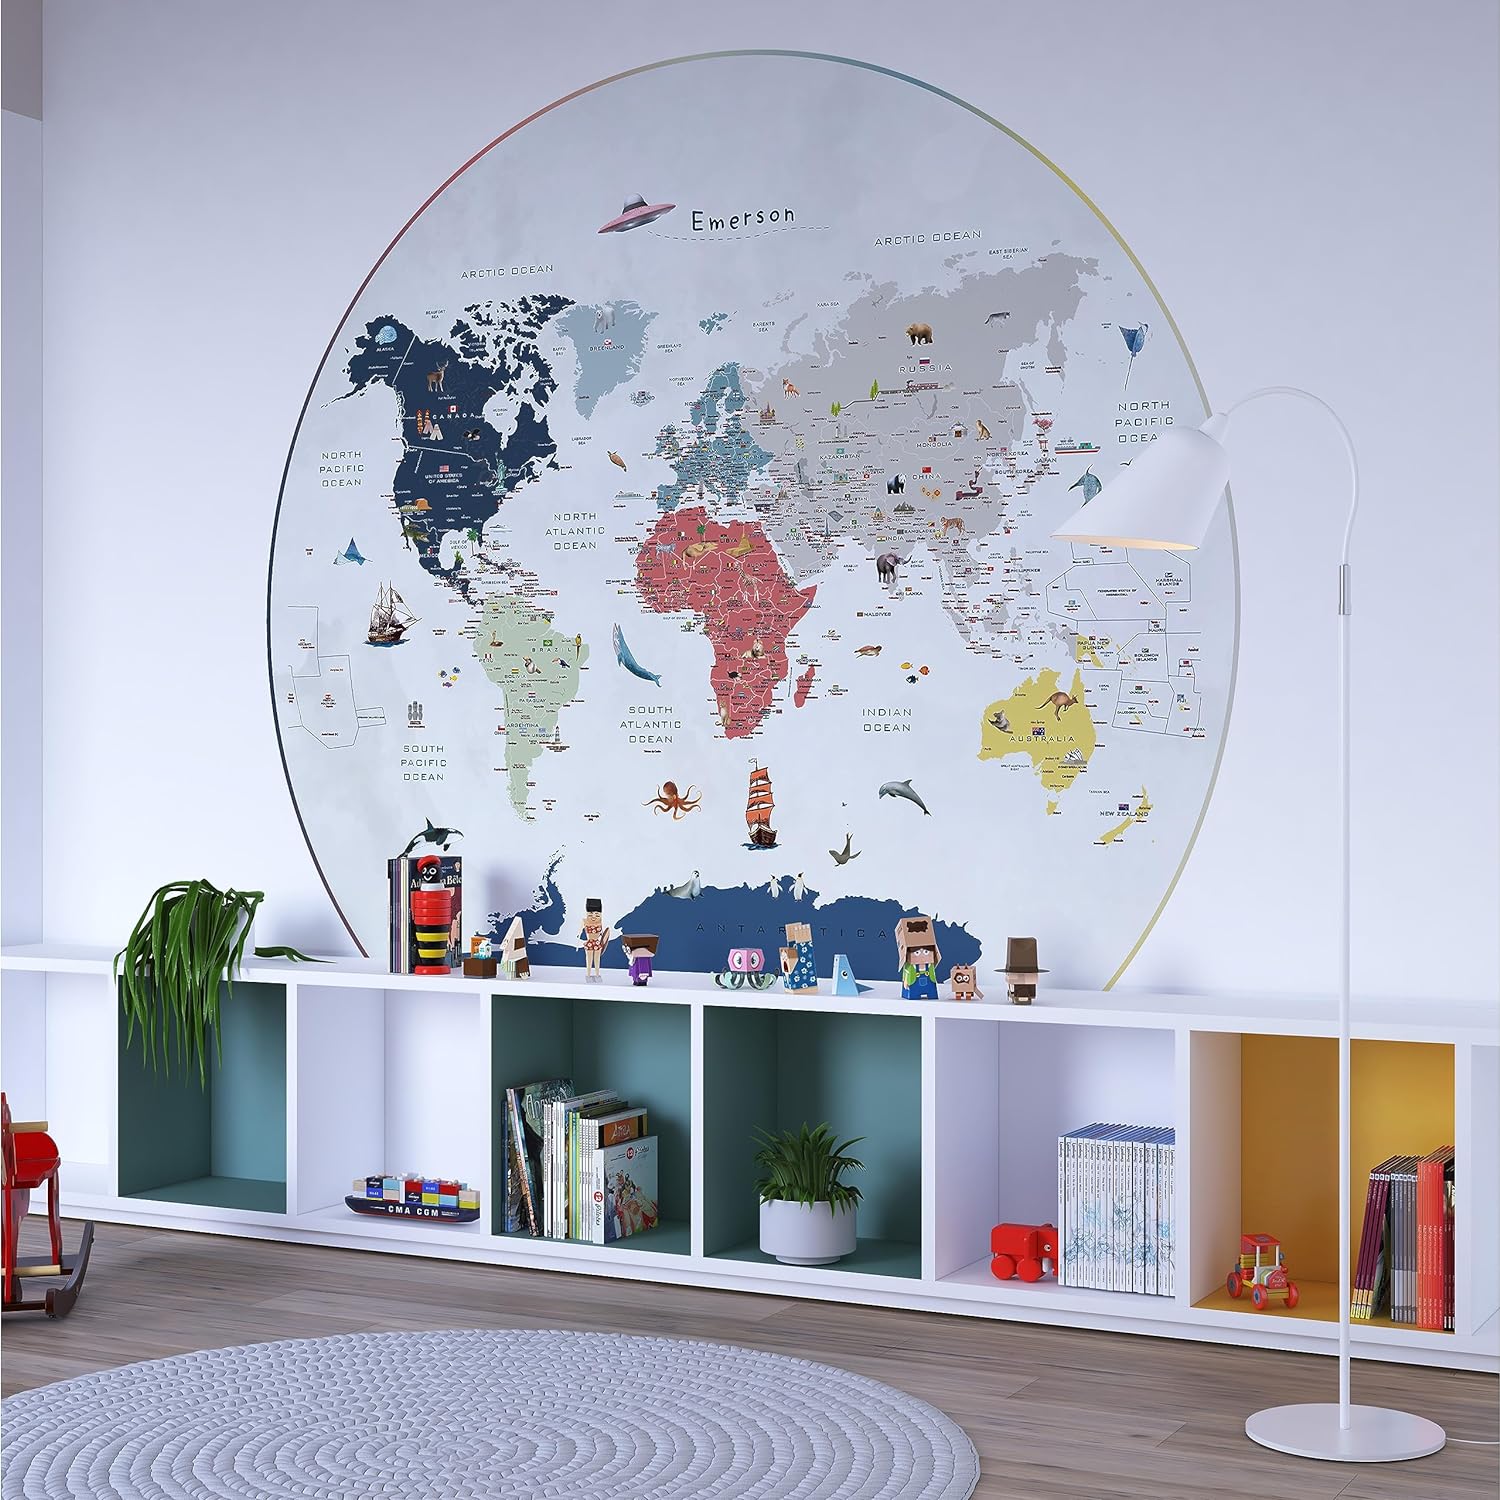 Colorful V Animal World Map Wallpaper for Kids Educational Augmented Reality Based Removable Nursery Wall Mural Peel and Stick Nonwoven 80in Round - Peel Stick Paper